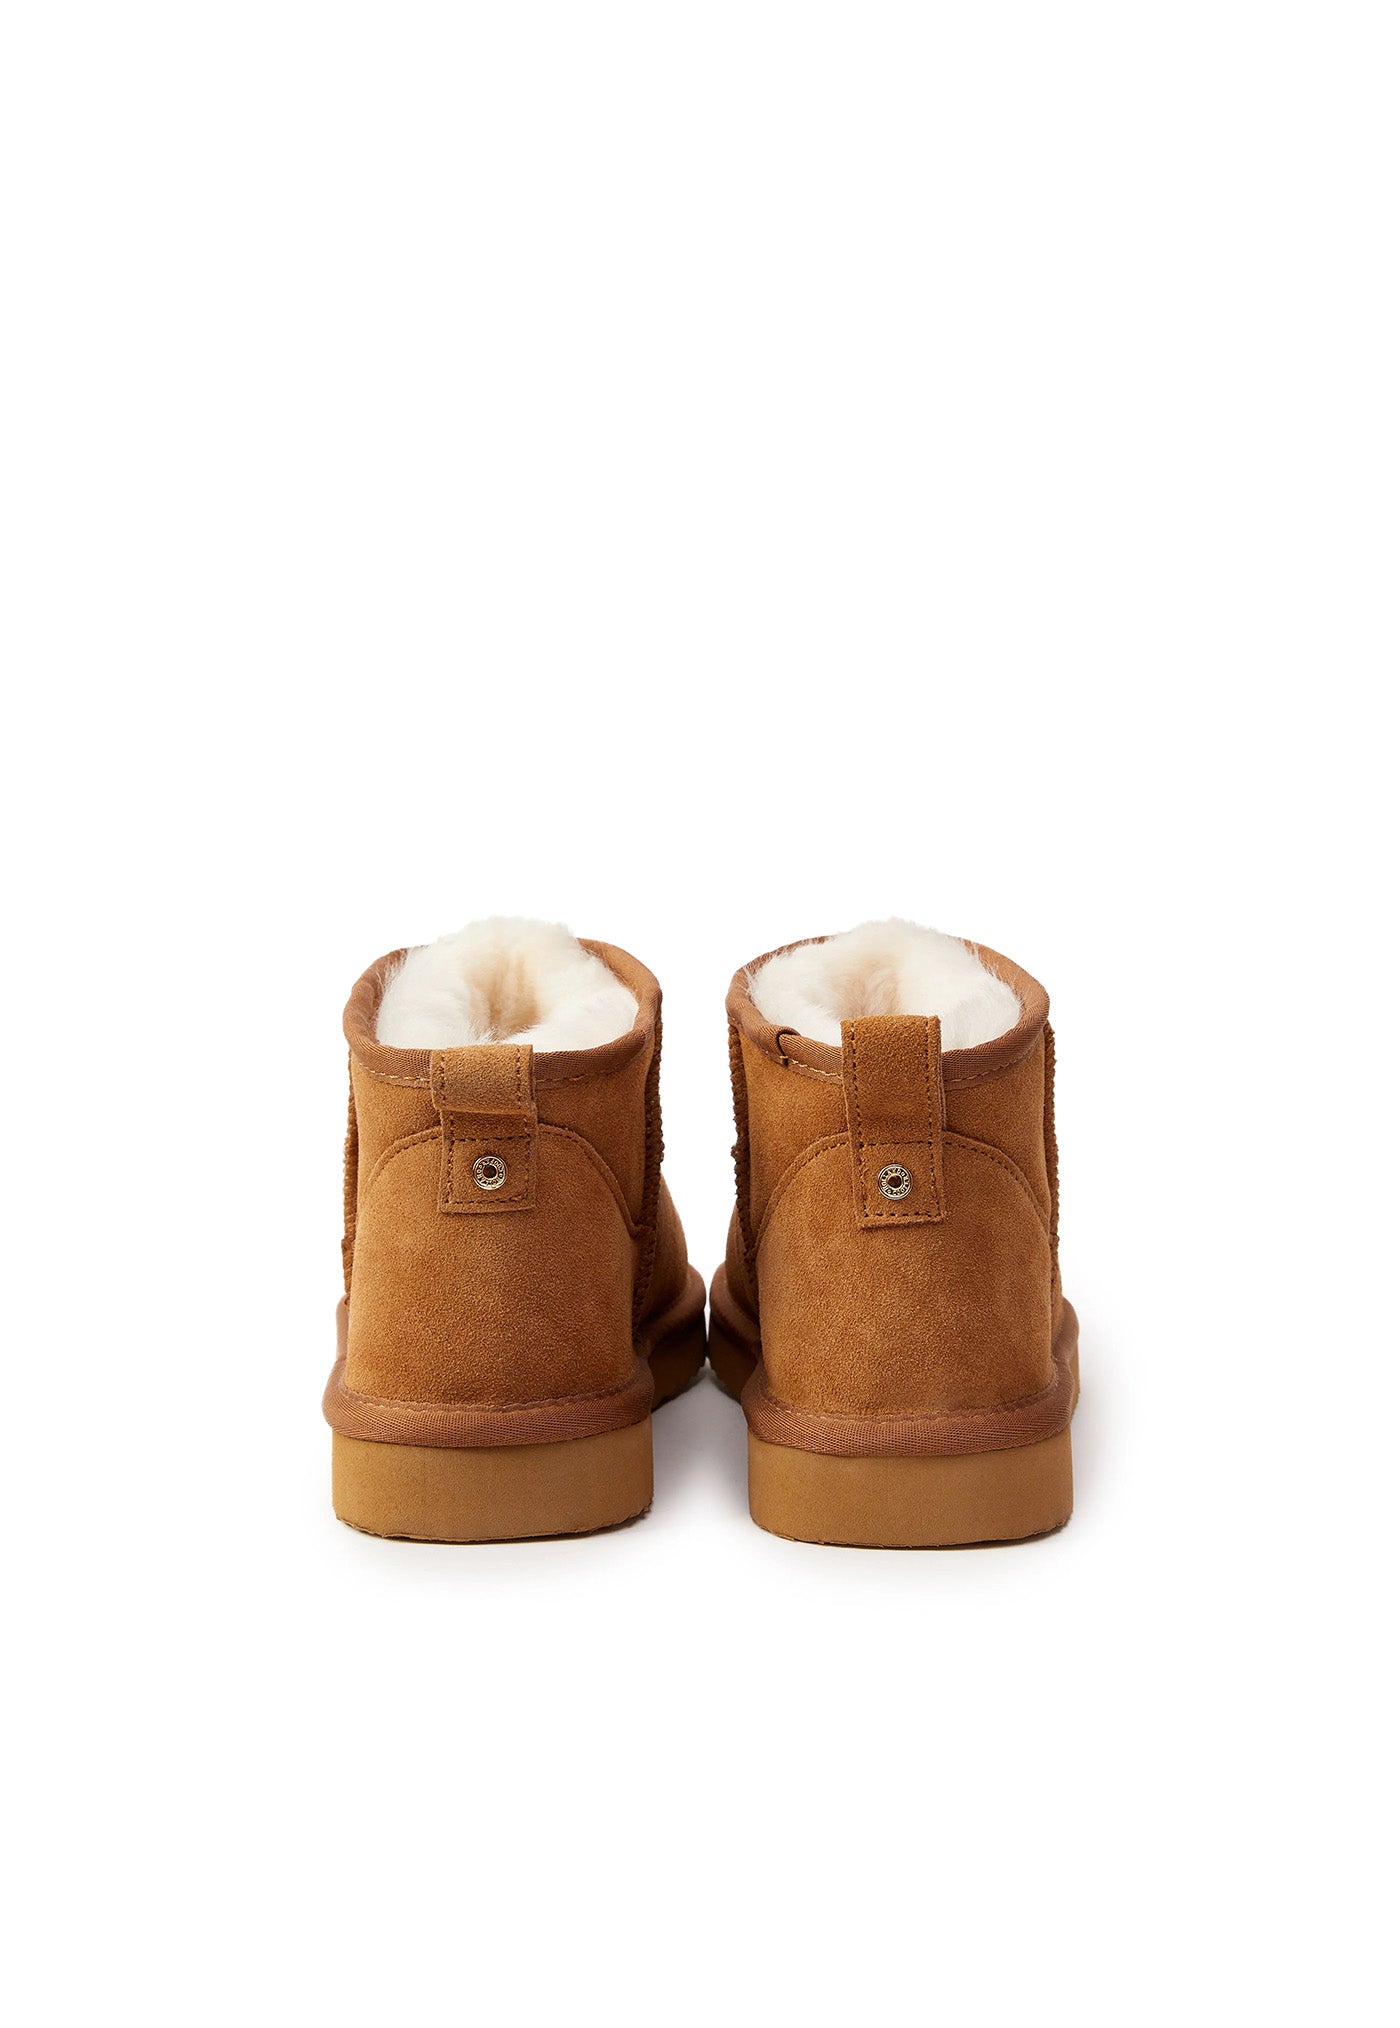 Ultra Mini Shearling Boot - Tan sold by Angel Divine